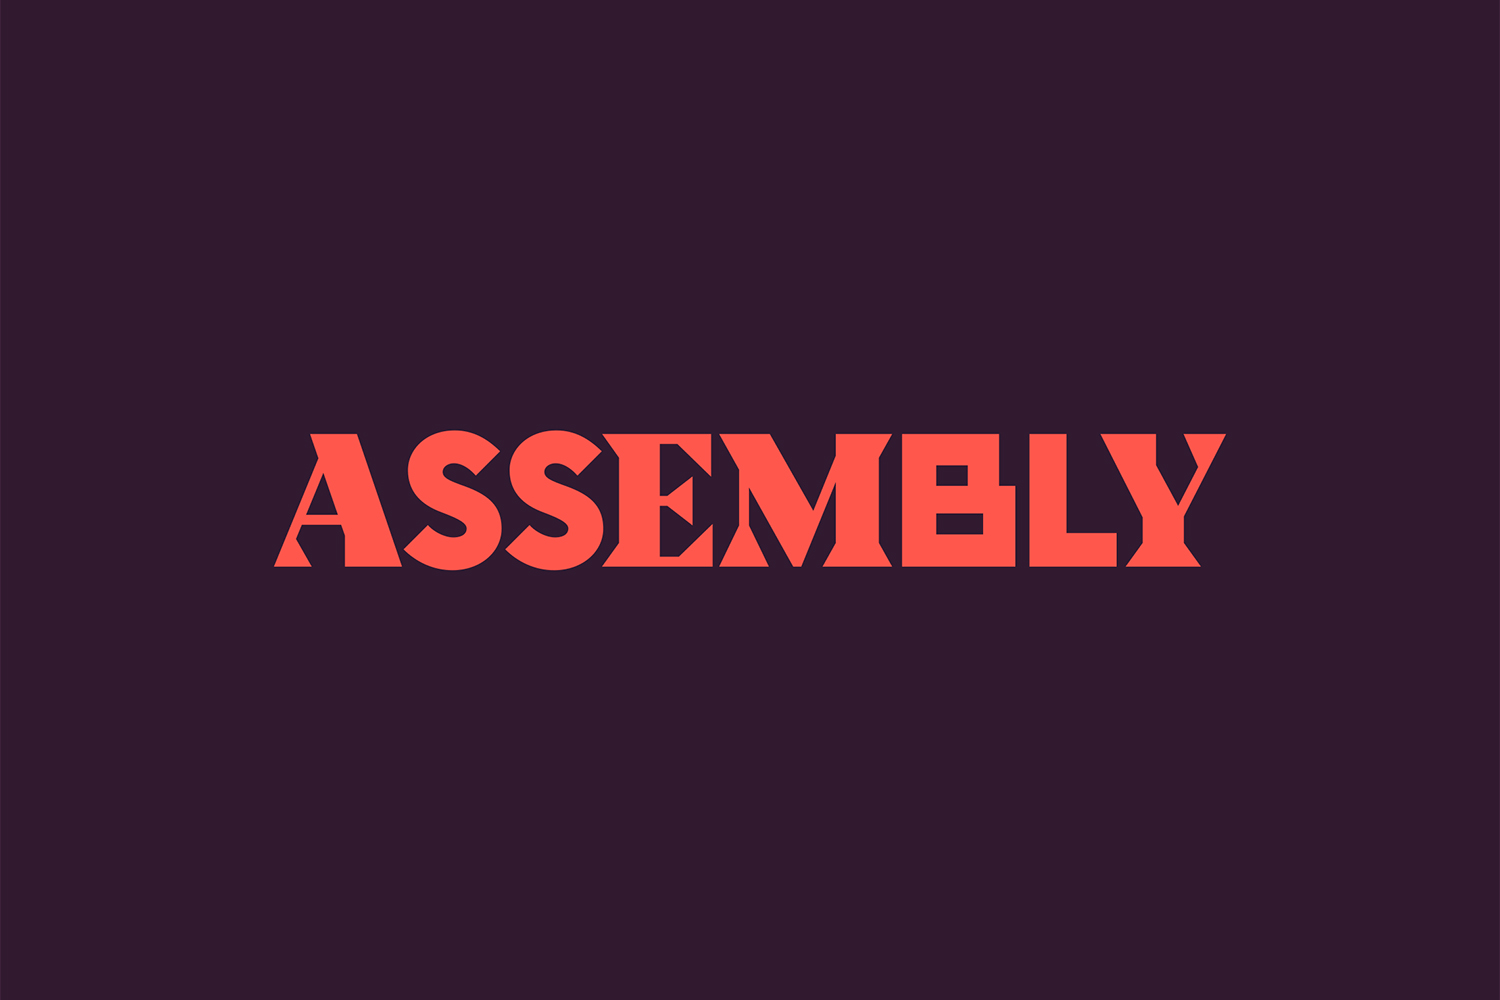 Creative Logotype Gallery & Inspiration: Assembly by Ragged Edge